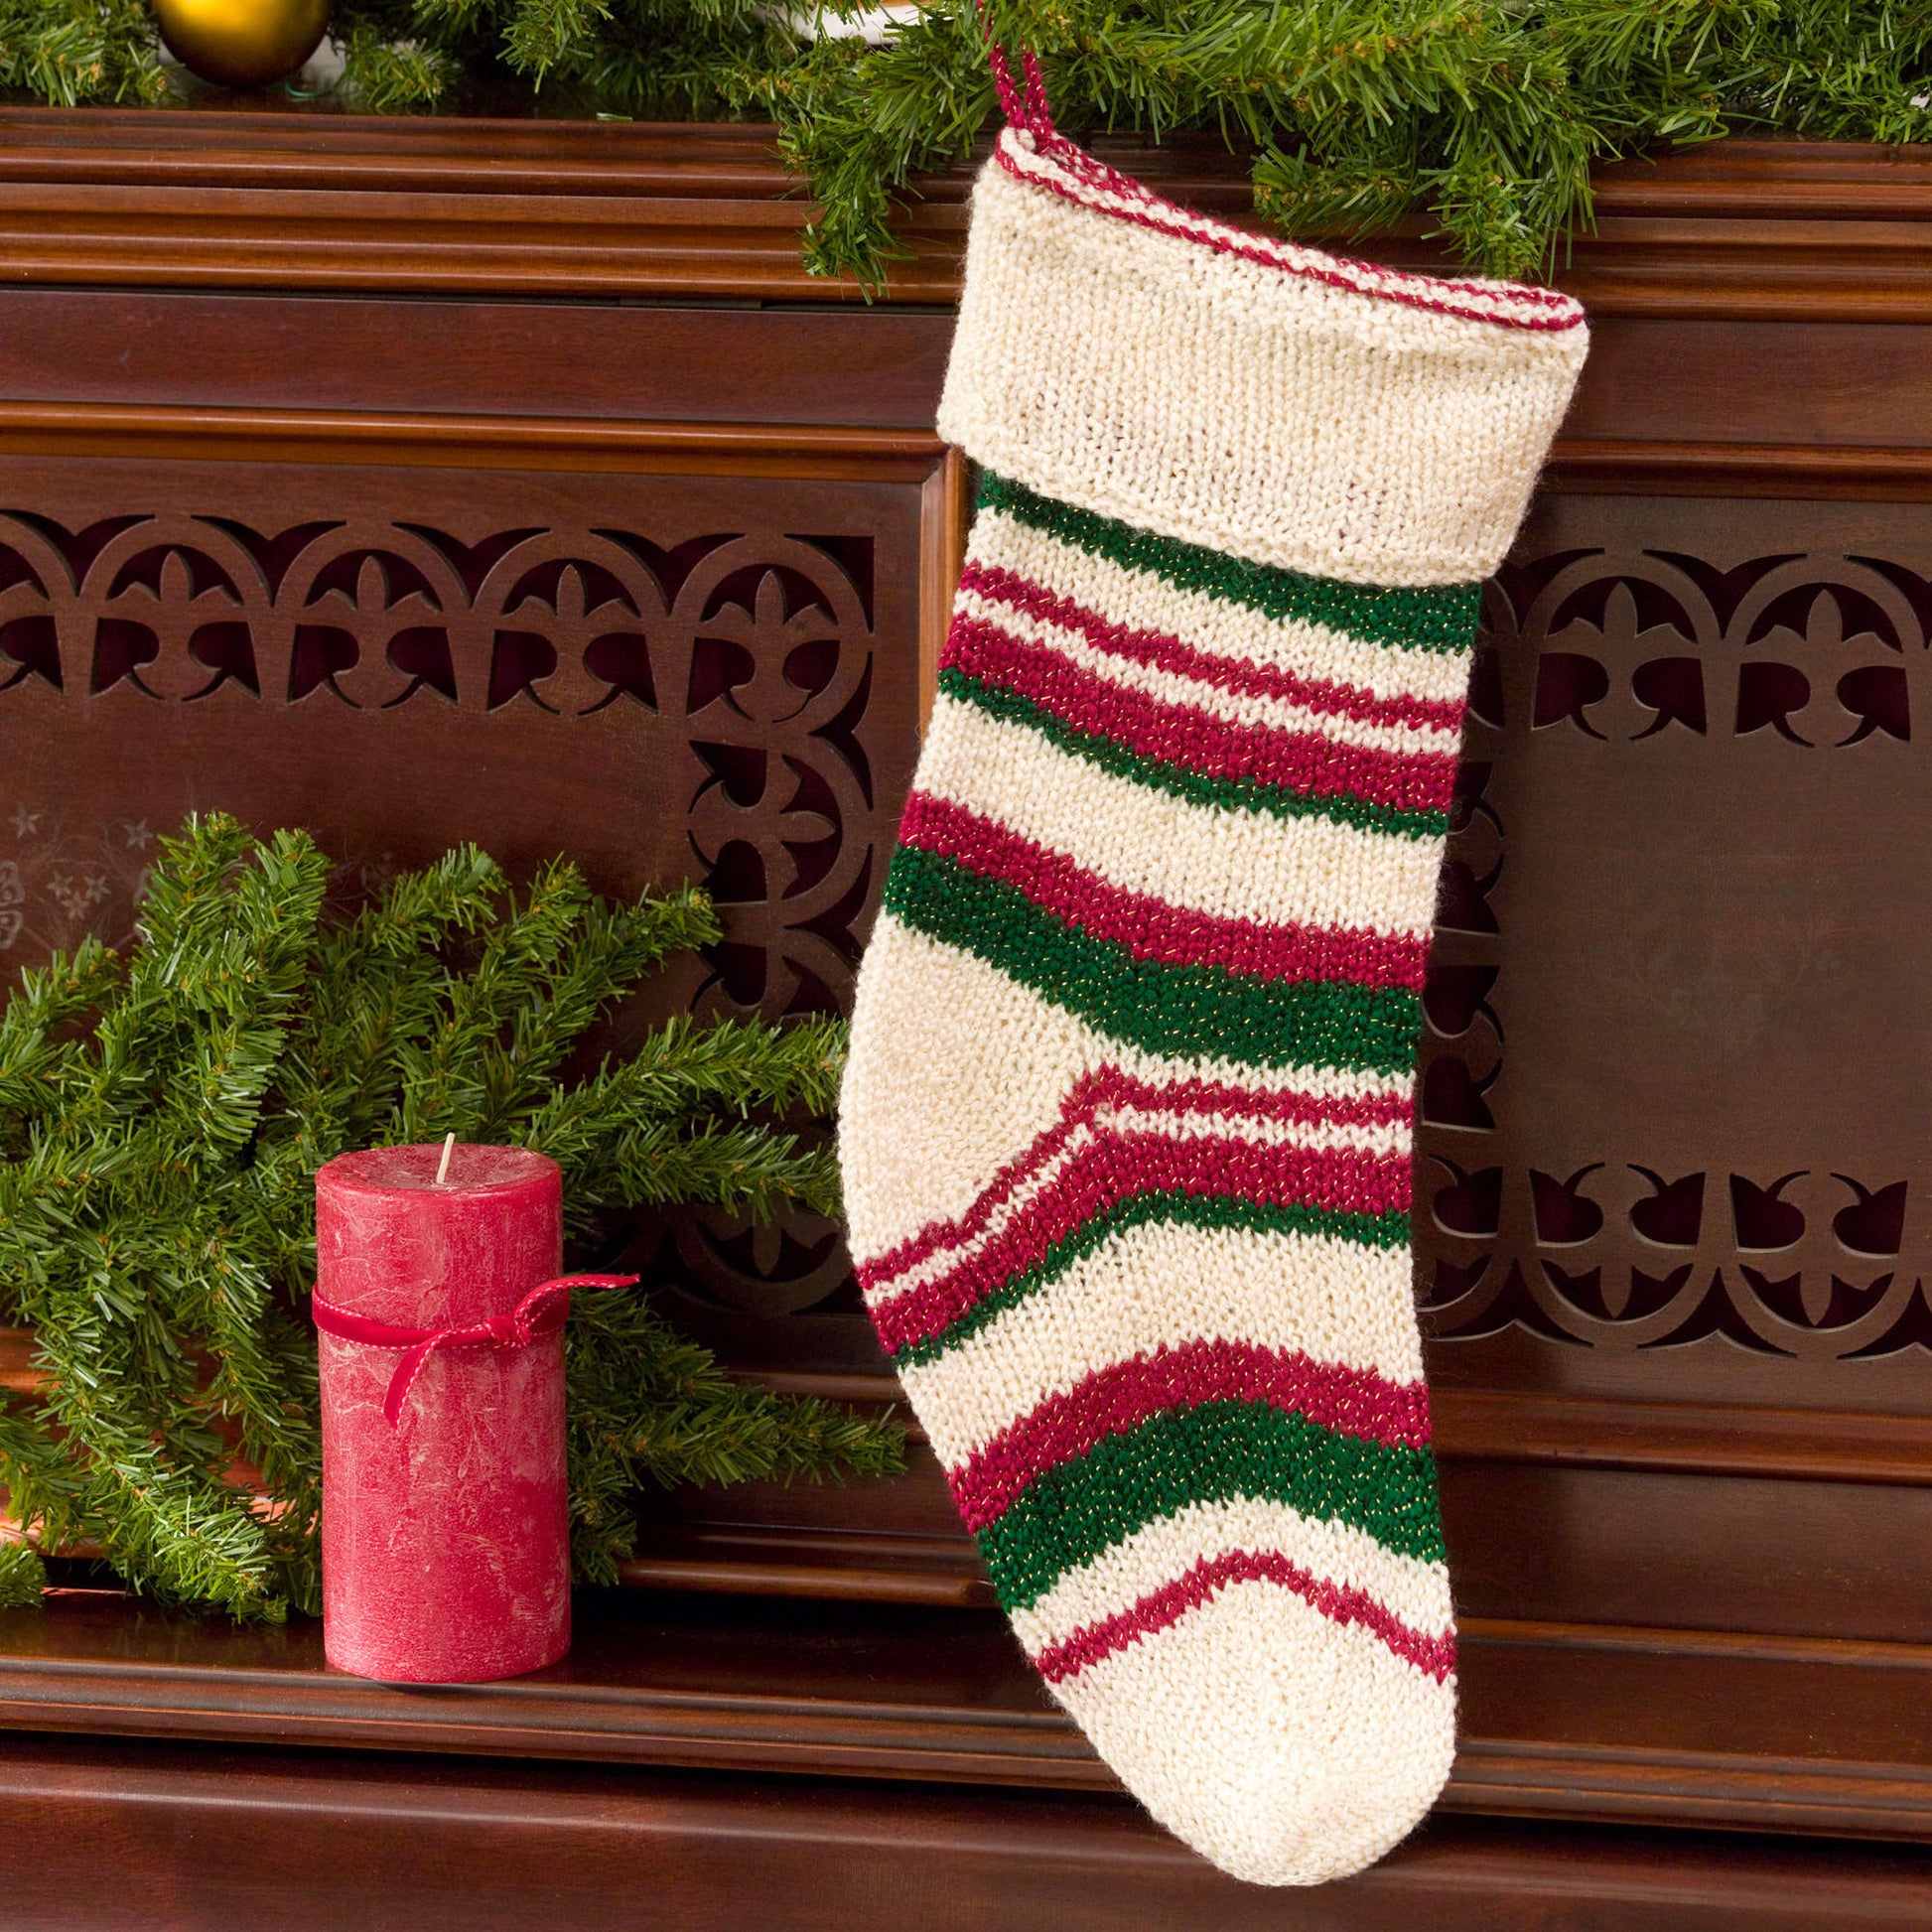 Free Red Heart Knit Christmas Stocking Pattern